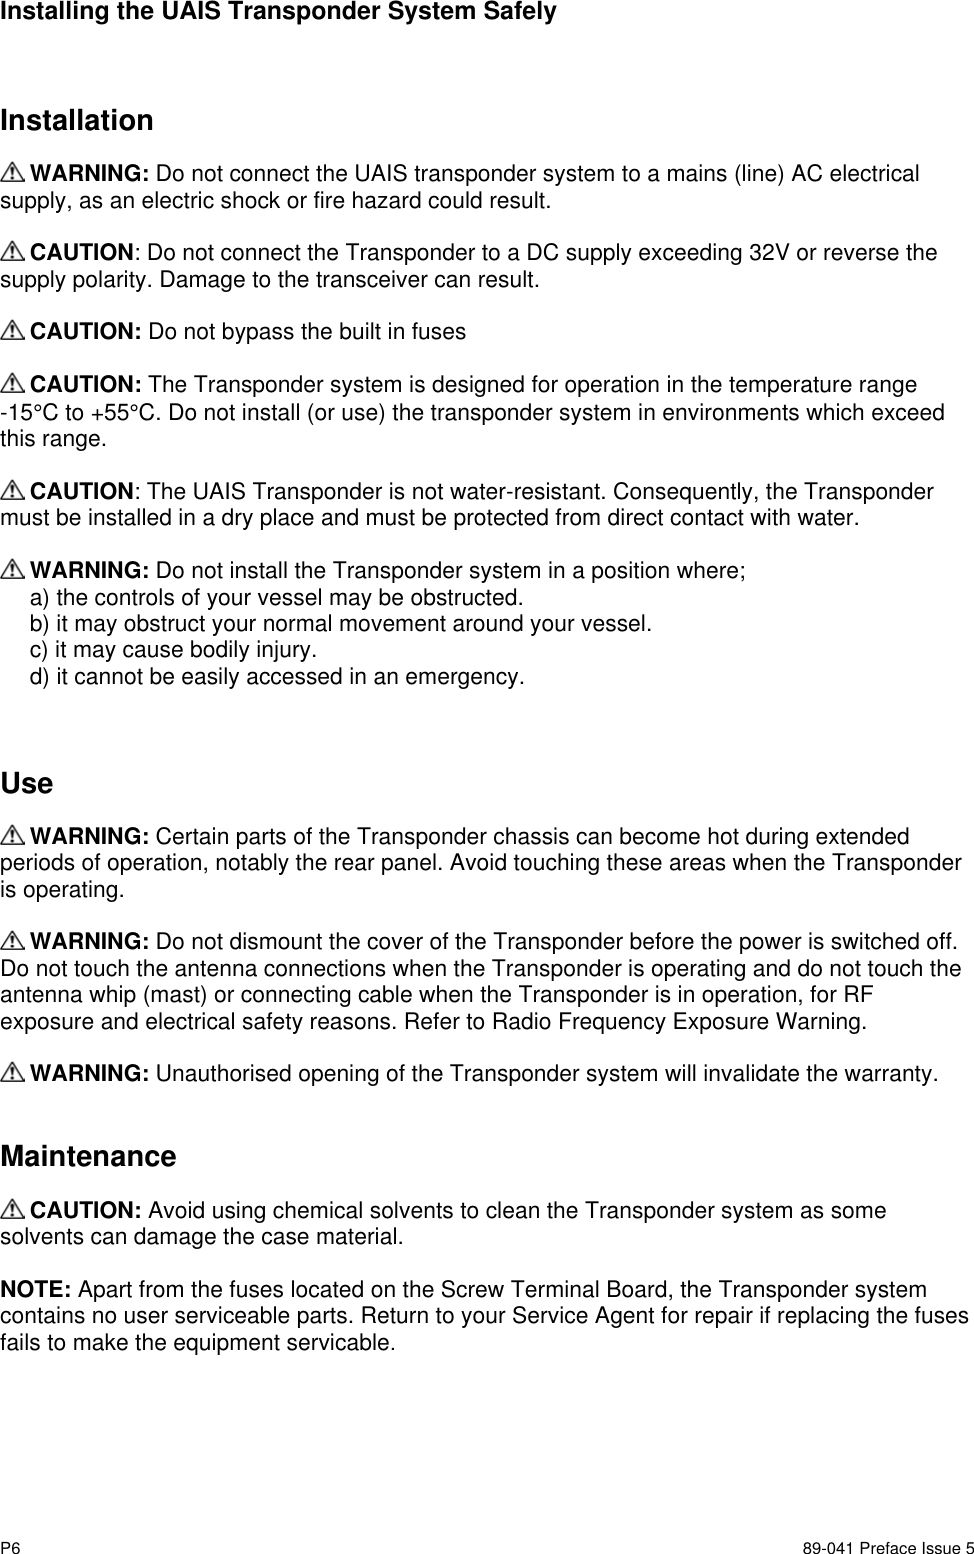 P6 89-041 Preface Issue 5Installing the UAIS Transponder System SafelyInstallation WARNING: Do not connect the UAIS transponder system to a mains (line) AC electricalsupply, as an electric shock or fire hazard could result. CAUTION: Do not connect the Transponder to a DC supply exceeding 32V or reverse thesupply polarity. Damage to the transceiver can result. CAUTION: Do not bypass the built in fuses CAUTION: The Transponder system is designed for operation in the temperature range-15°C to +55°C. Do not install (or use) the transponder system in environments which exceedthis range. CAUTION: The UAIS Transponder is not water-resistant. Consequently, the Transpondermust be installed in a dry place and must be protected from direct contact with water. WARNING: Do not install the Transponder system in a position where;a) the controls of your vessel may be obstructed.b) it may obstruct your normal movement around your vessel.c) it may cause bodily injury.d) it cannot be easily accessed in an emergency.Use WARNING: Certain parts of the Transponder chassis can become hot during extendedperiods of operation, notably the rear panel. Avoid touching these areas when the Transponderis operating. WARNING: Do not dismount the cover of the Transponder before the power is switched off.Do not touch the antenna connections when the Transponder is operating and do not touch theantenna whip (mast) or connecting cable when the Transponder is in operation, for RFexposure and electrical safety reasons. Refer to Radio Frequency Exposure Warning. WARNING: Unauthorised opening of the Transponder system will invalidate the warranty.Maintenance CAUTION: Avoid using chemical solvents to clean the Transponder system as somesolvents can damage the case material.NOTE: Apart from the fuses located on the Screw Terminal Board, the Transponder systemcontains no user serviceable parts. Return to your Service Agent for repair if replacing the fusesfails to make the equipment servicable.